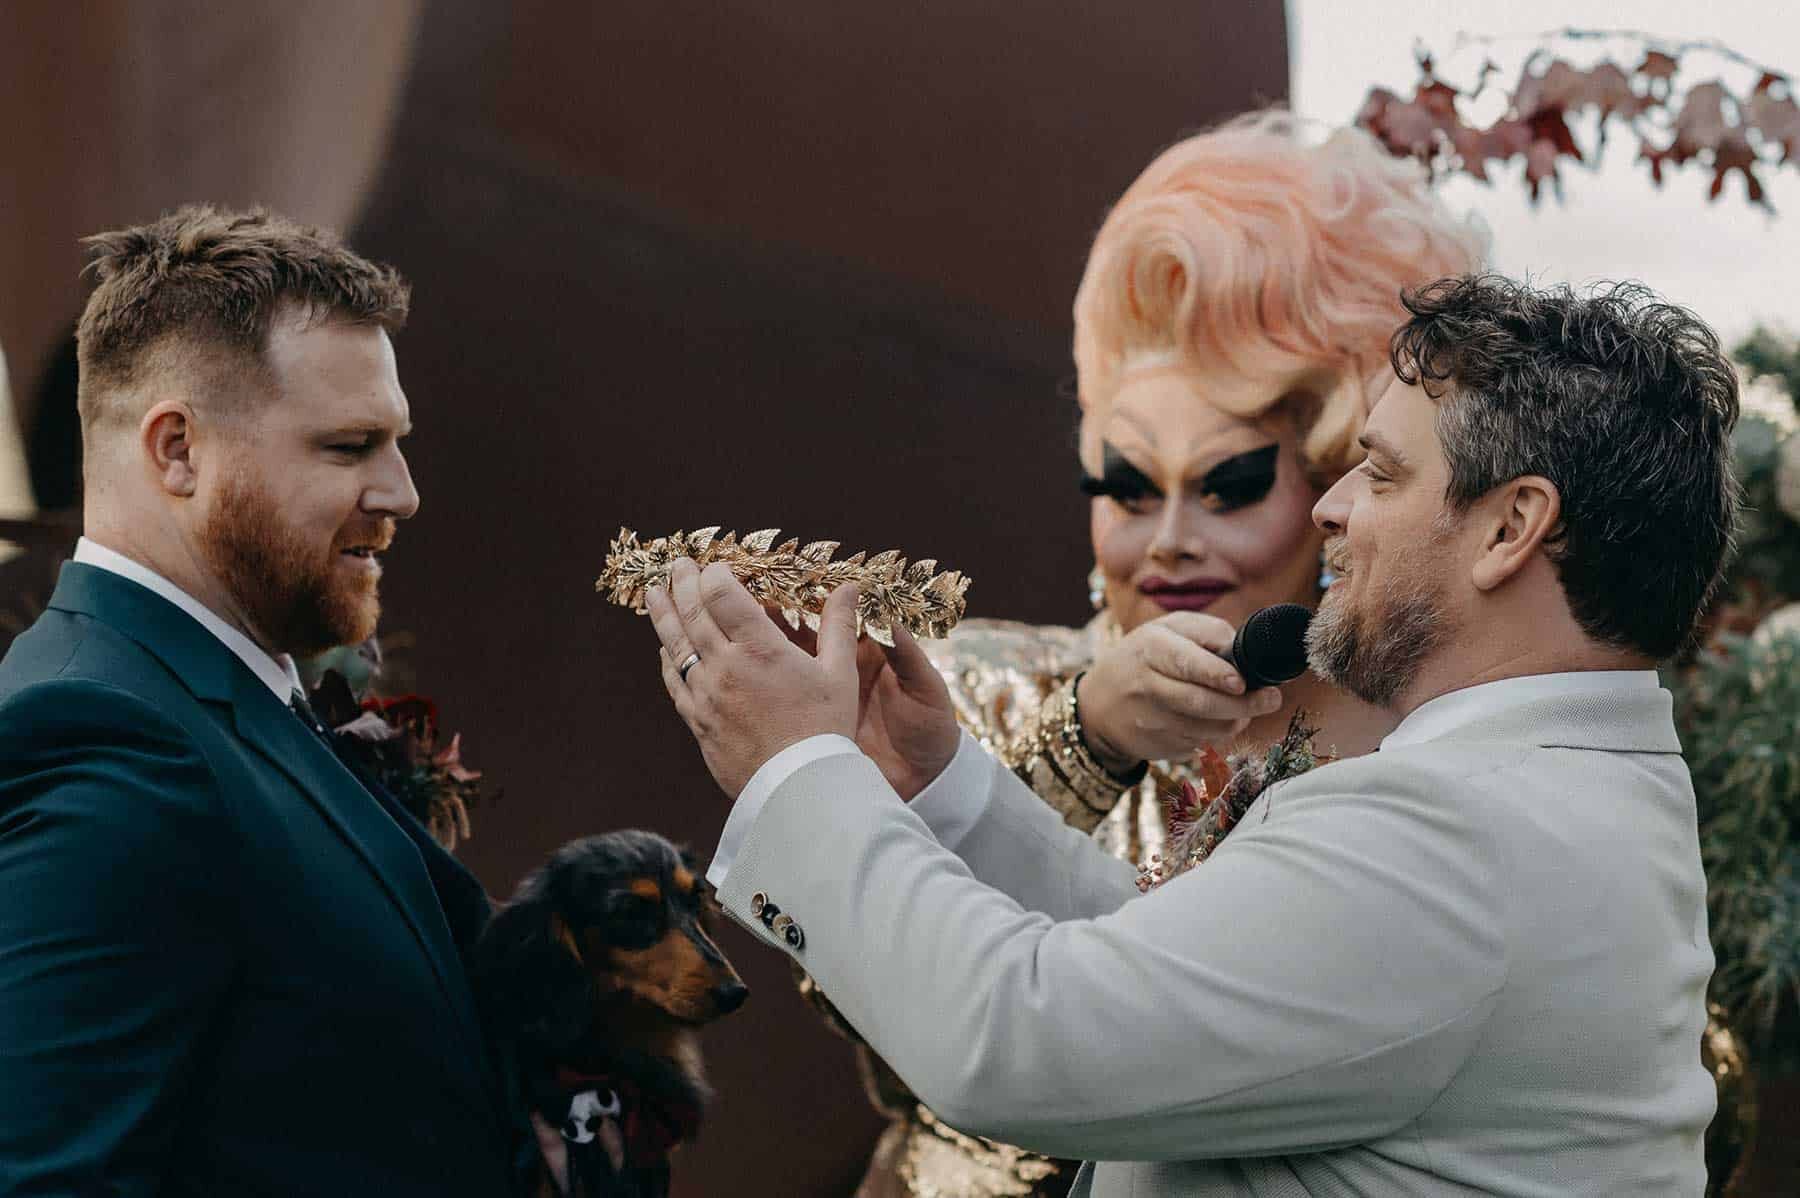 two grooms exchanging crowns instead of wedding rings